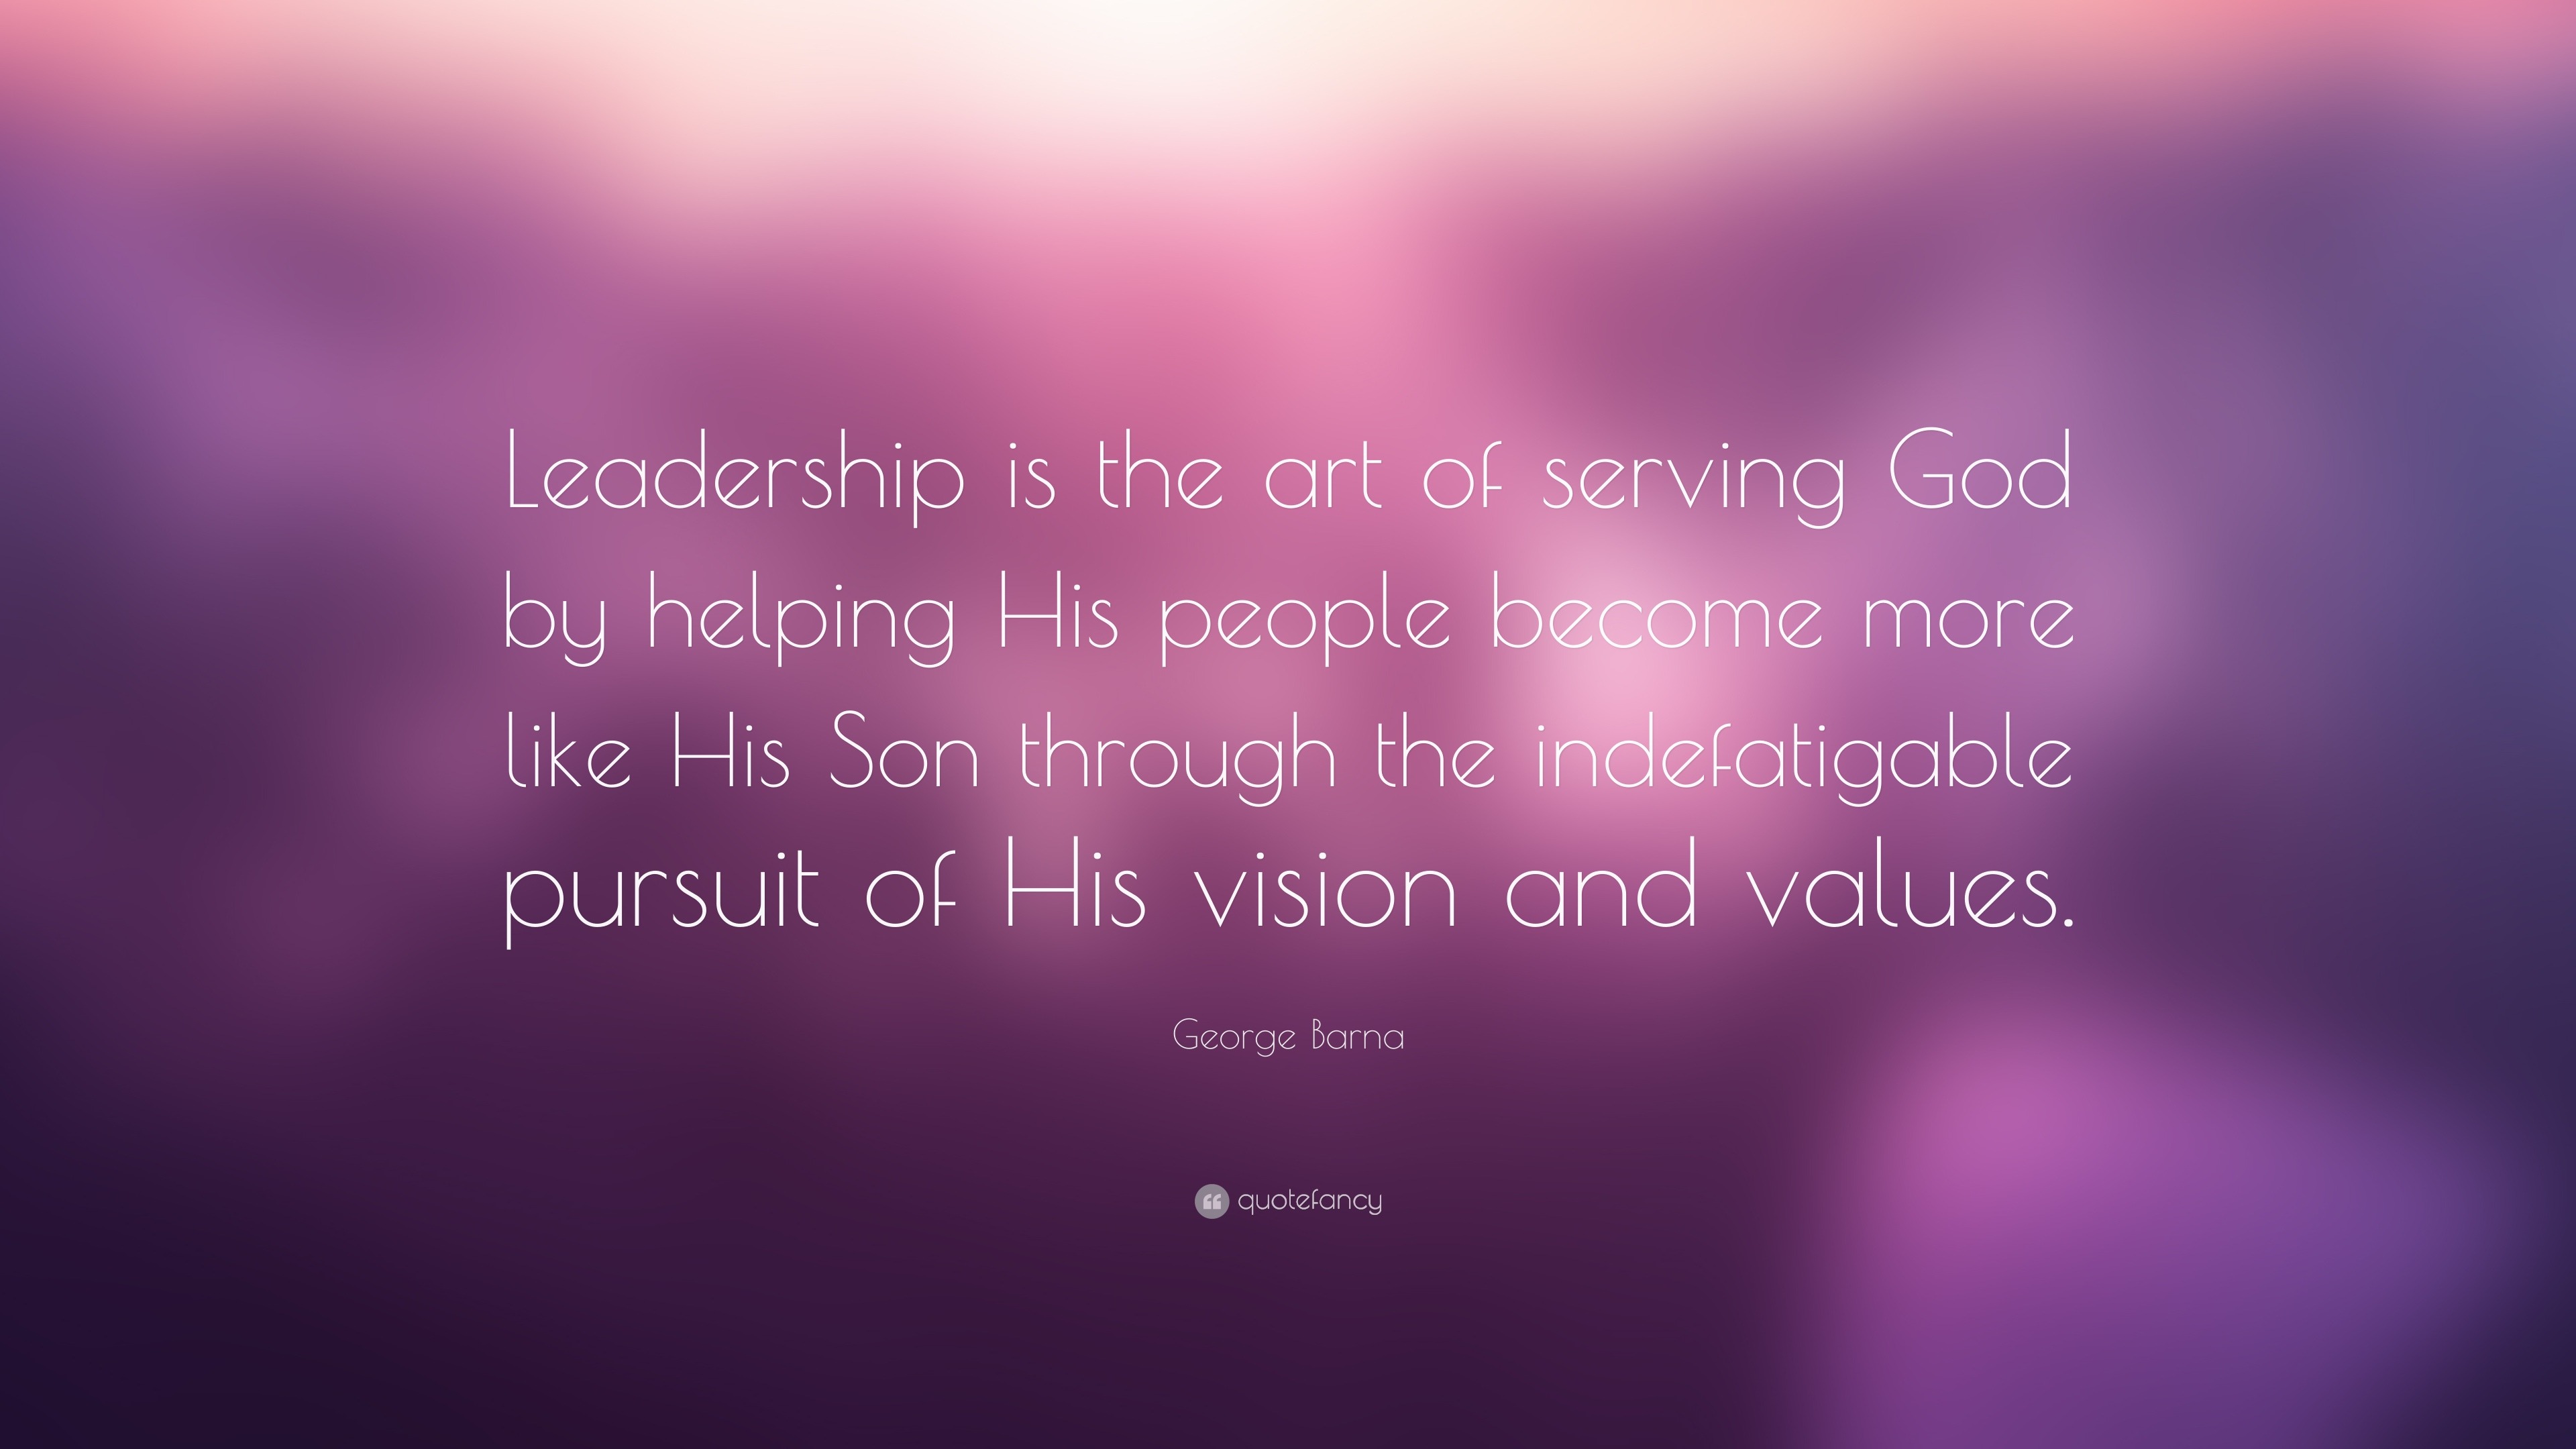 George Barna Quote: “Leadership is the art of serving God by helping ...